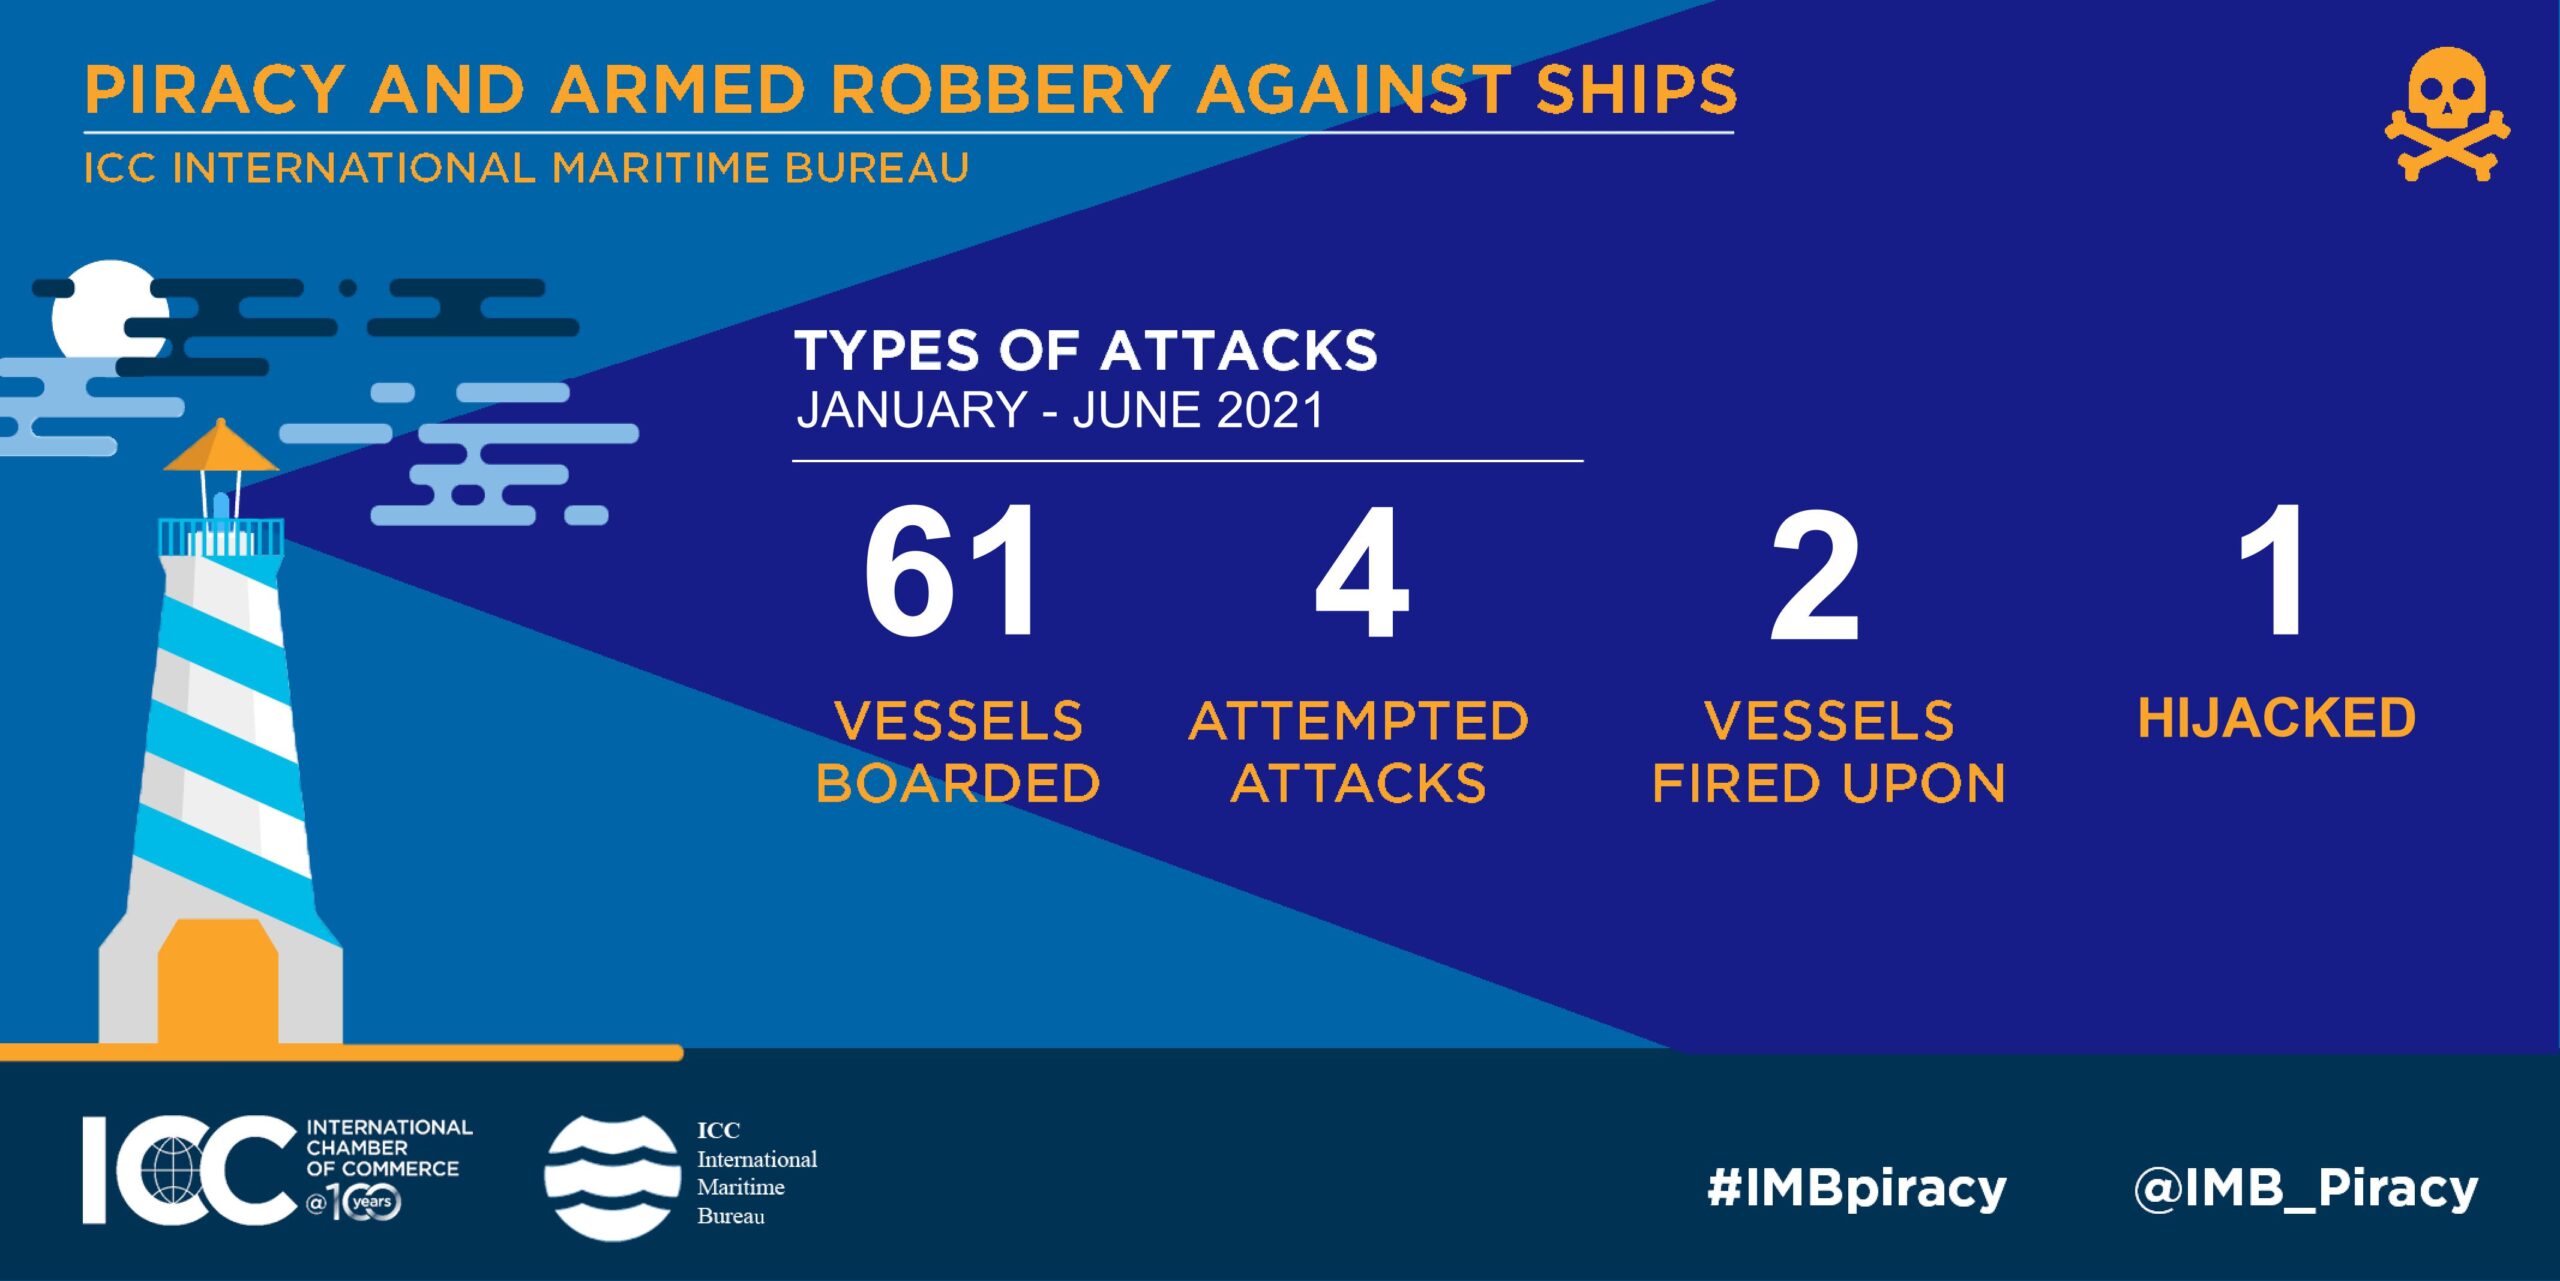 Piracy and armed robbery at lowest level in 27 years, says IMB